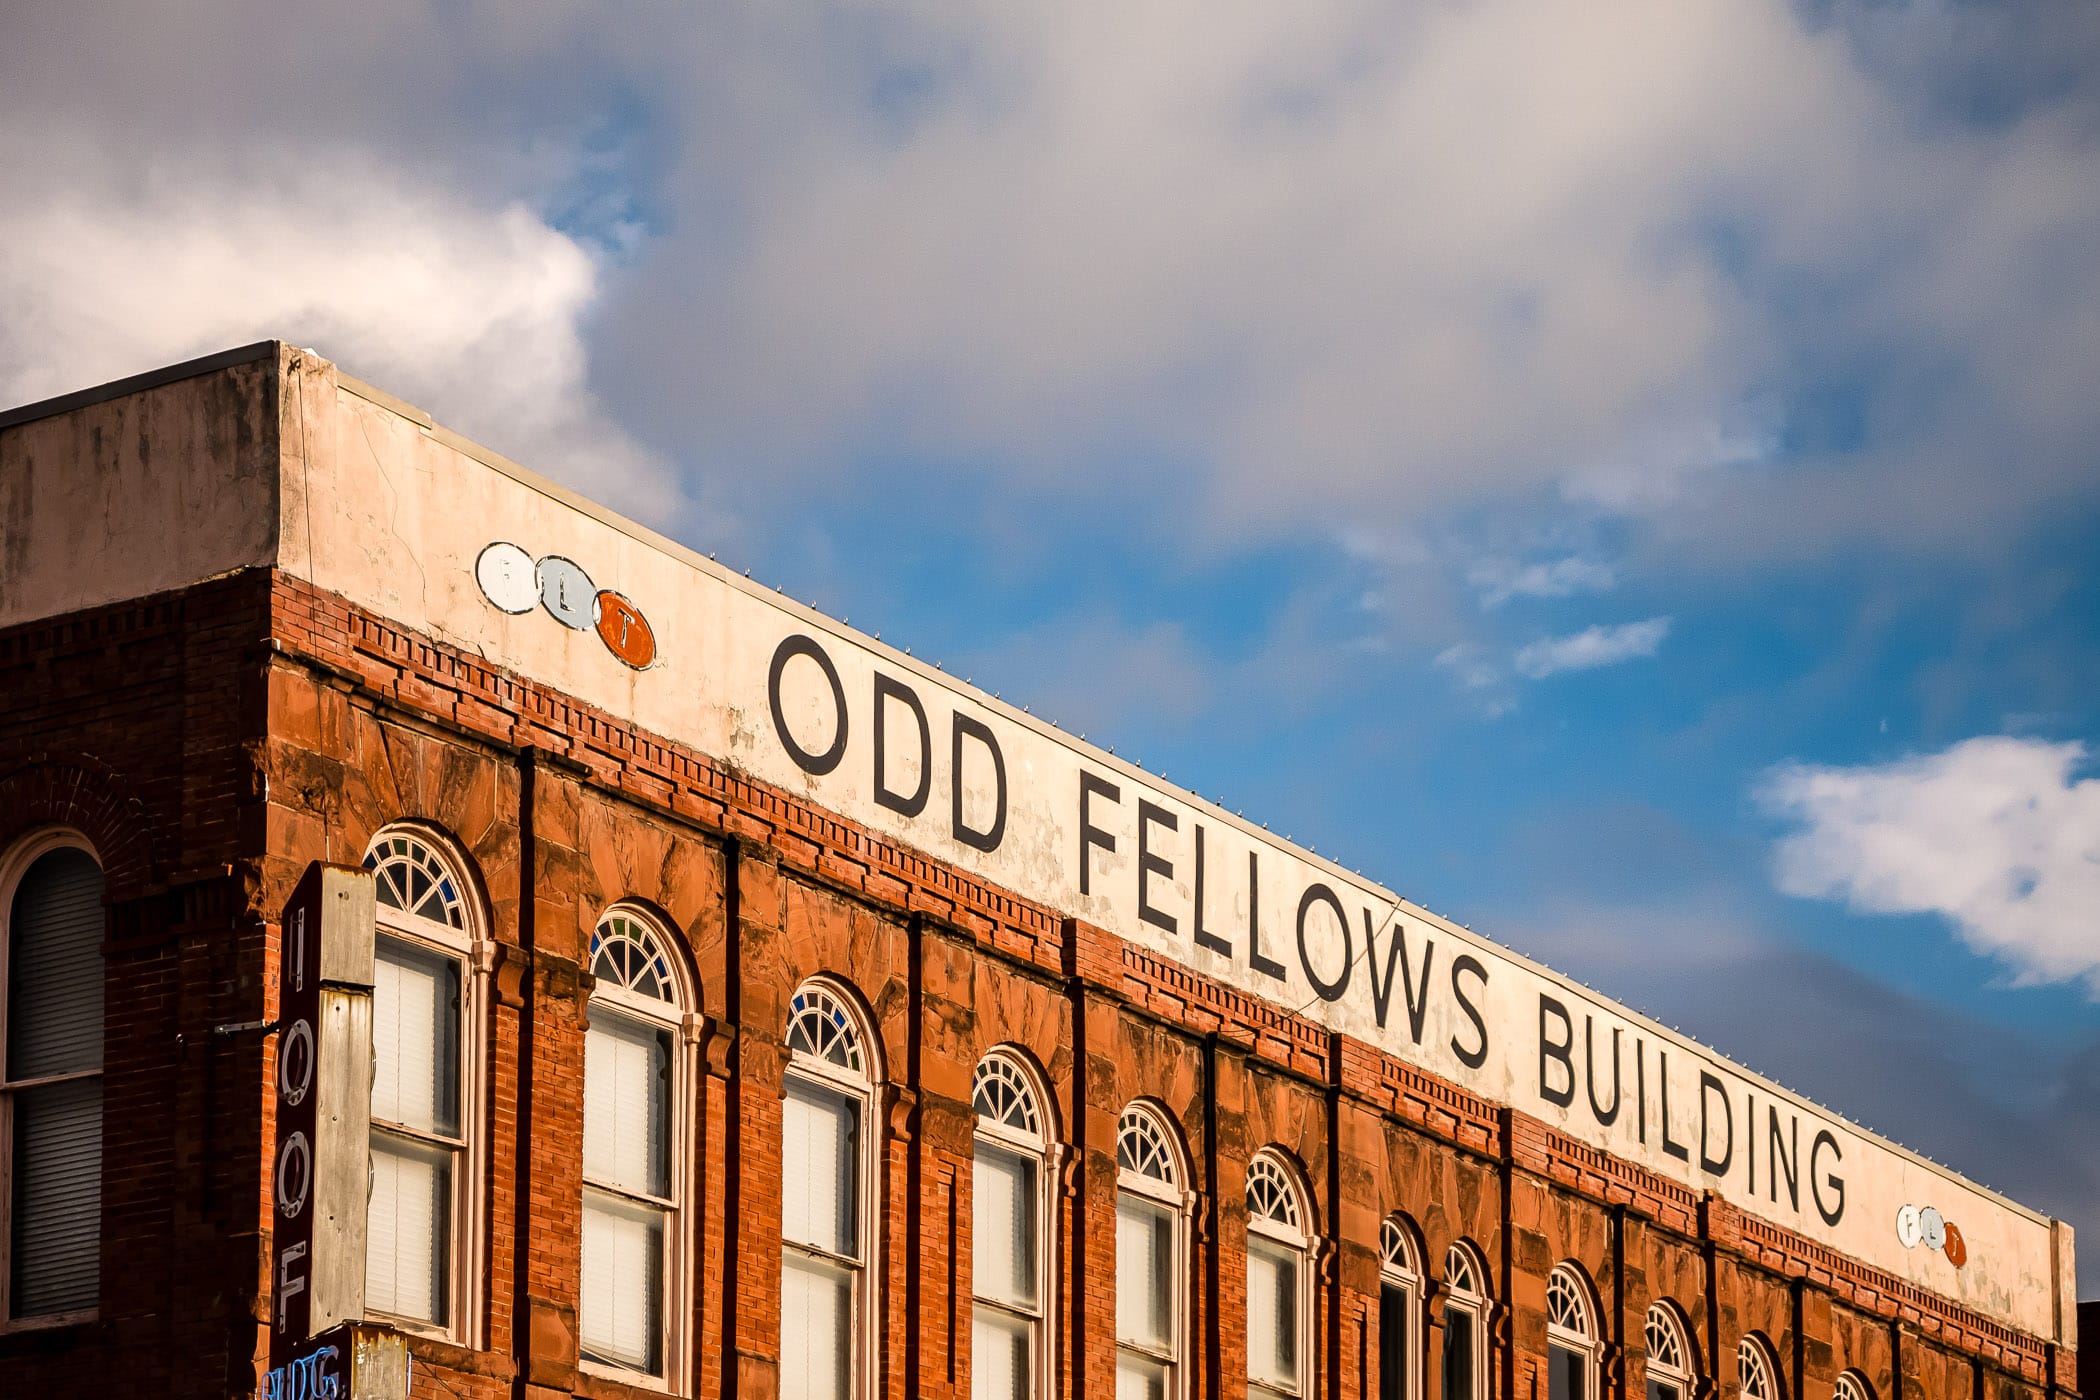 Exterior detail of the Independent Order of Odd Fellows (IOOF) lodge in Downtown Waxahachie, Texas.